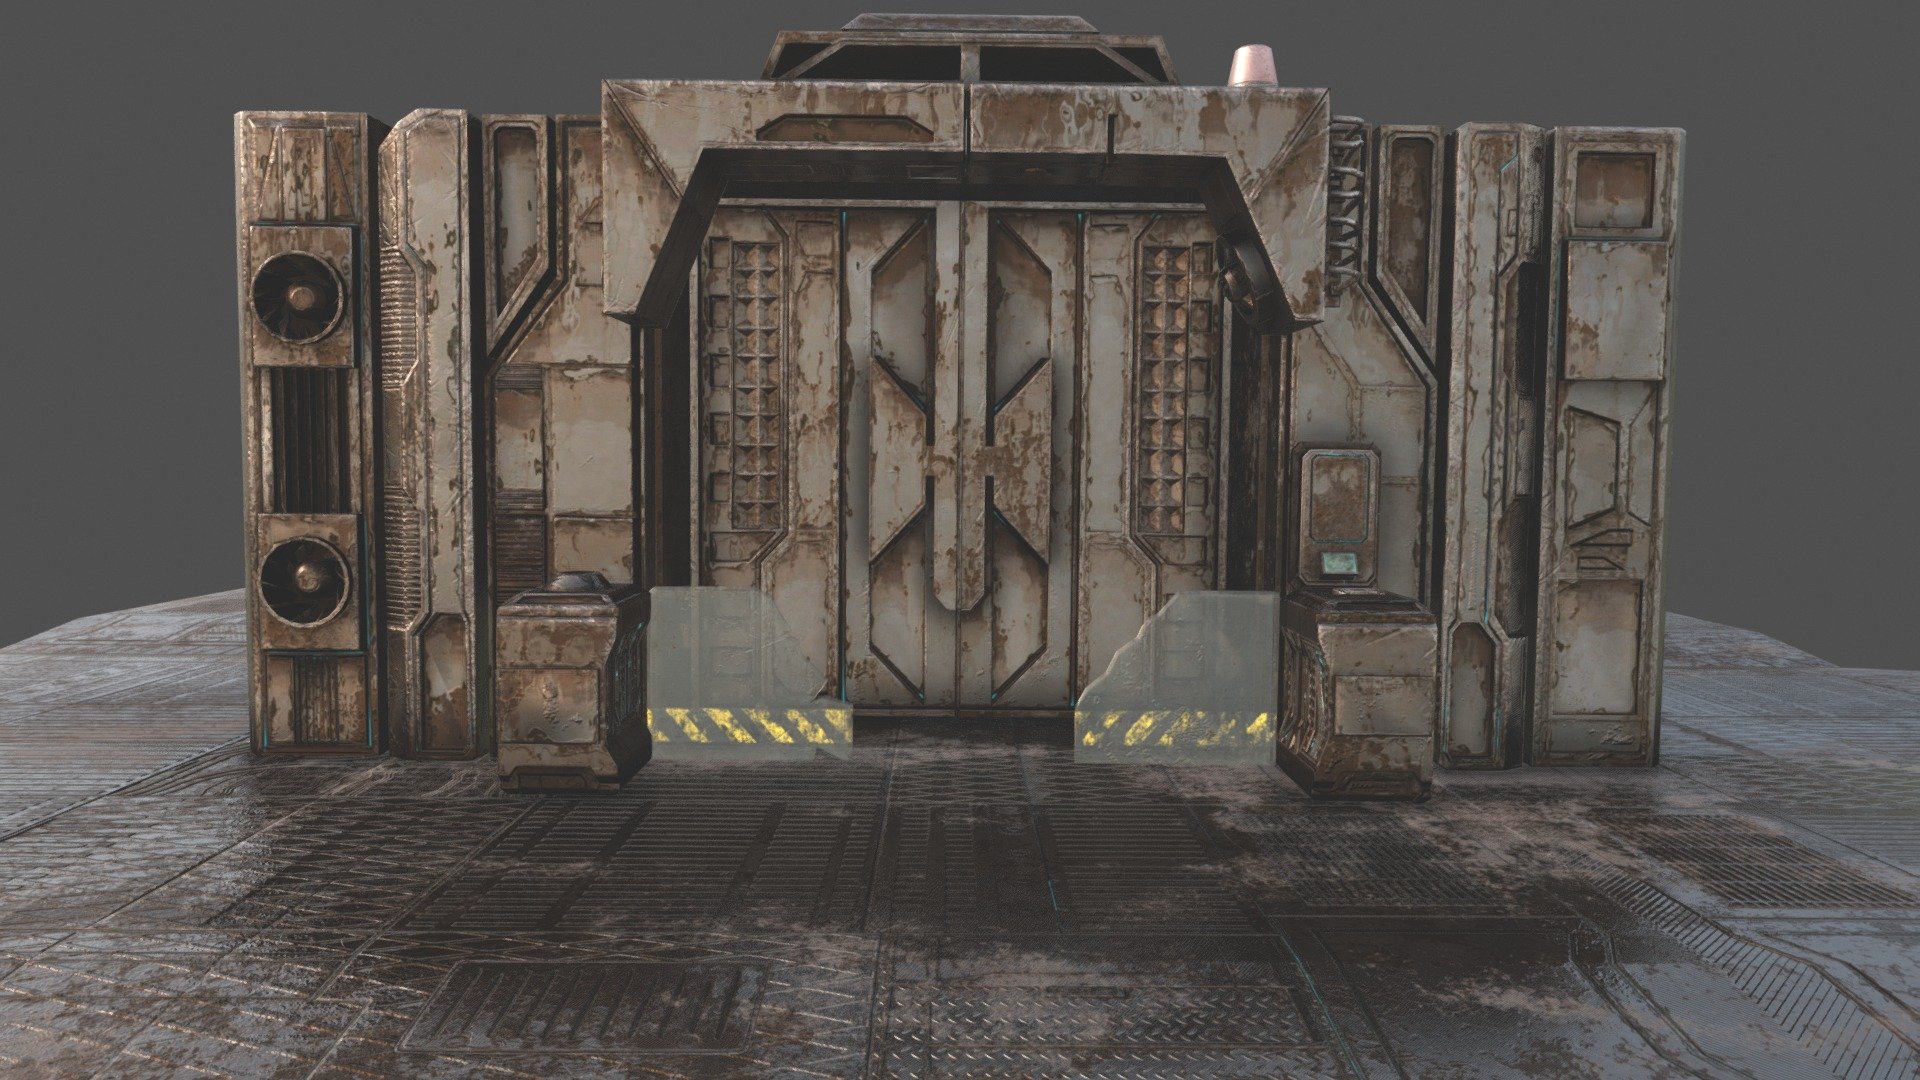 SCI-FI ENTRANCE 

4K PBR TEXTURE FLOOR 

4K PBR TEXTURE GATE

DIMENSION:        LENGTH:2516         WIDTH:3260      HEIGHT:830

POLYGON COUNTS: 4606 faces   4847 vertices

As a hard surface artist,  I really enjoy creating a small piece of environment with lots of details.creating this sci-fi entrance  was a hell of a fun this one is apocalypse version with no animtion and no emmisive an no light. full version with holograms and animation will be availbale in the store . i really hope you like this model cheers;)

see the full version with animation http://adriancgmask.com/portfolio-item/sci-fi-entrance/

please visit my website: adirancgmask.com

www.artstation.com/adriancgmask - SCI-FI ENTRANCE APOCALYPSE - Download Free 3D model by Adriancgmask 3d model